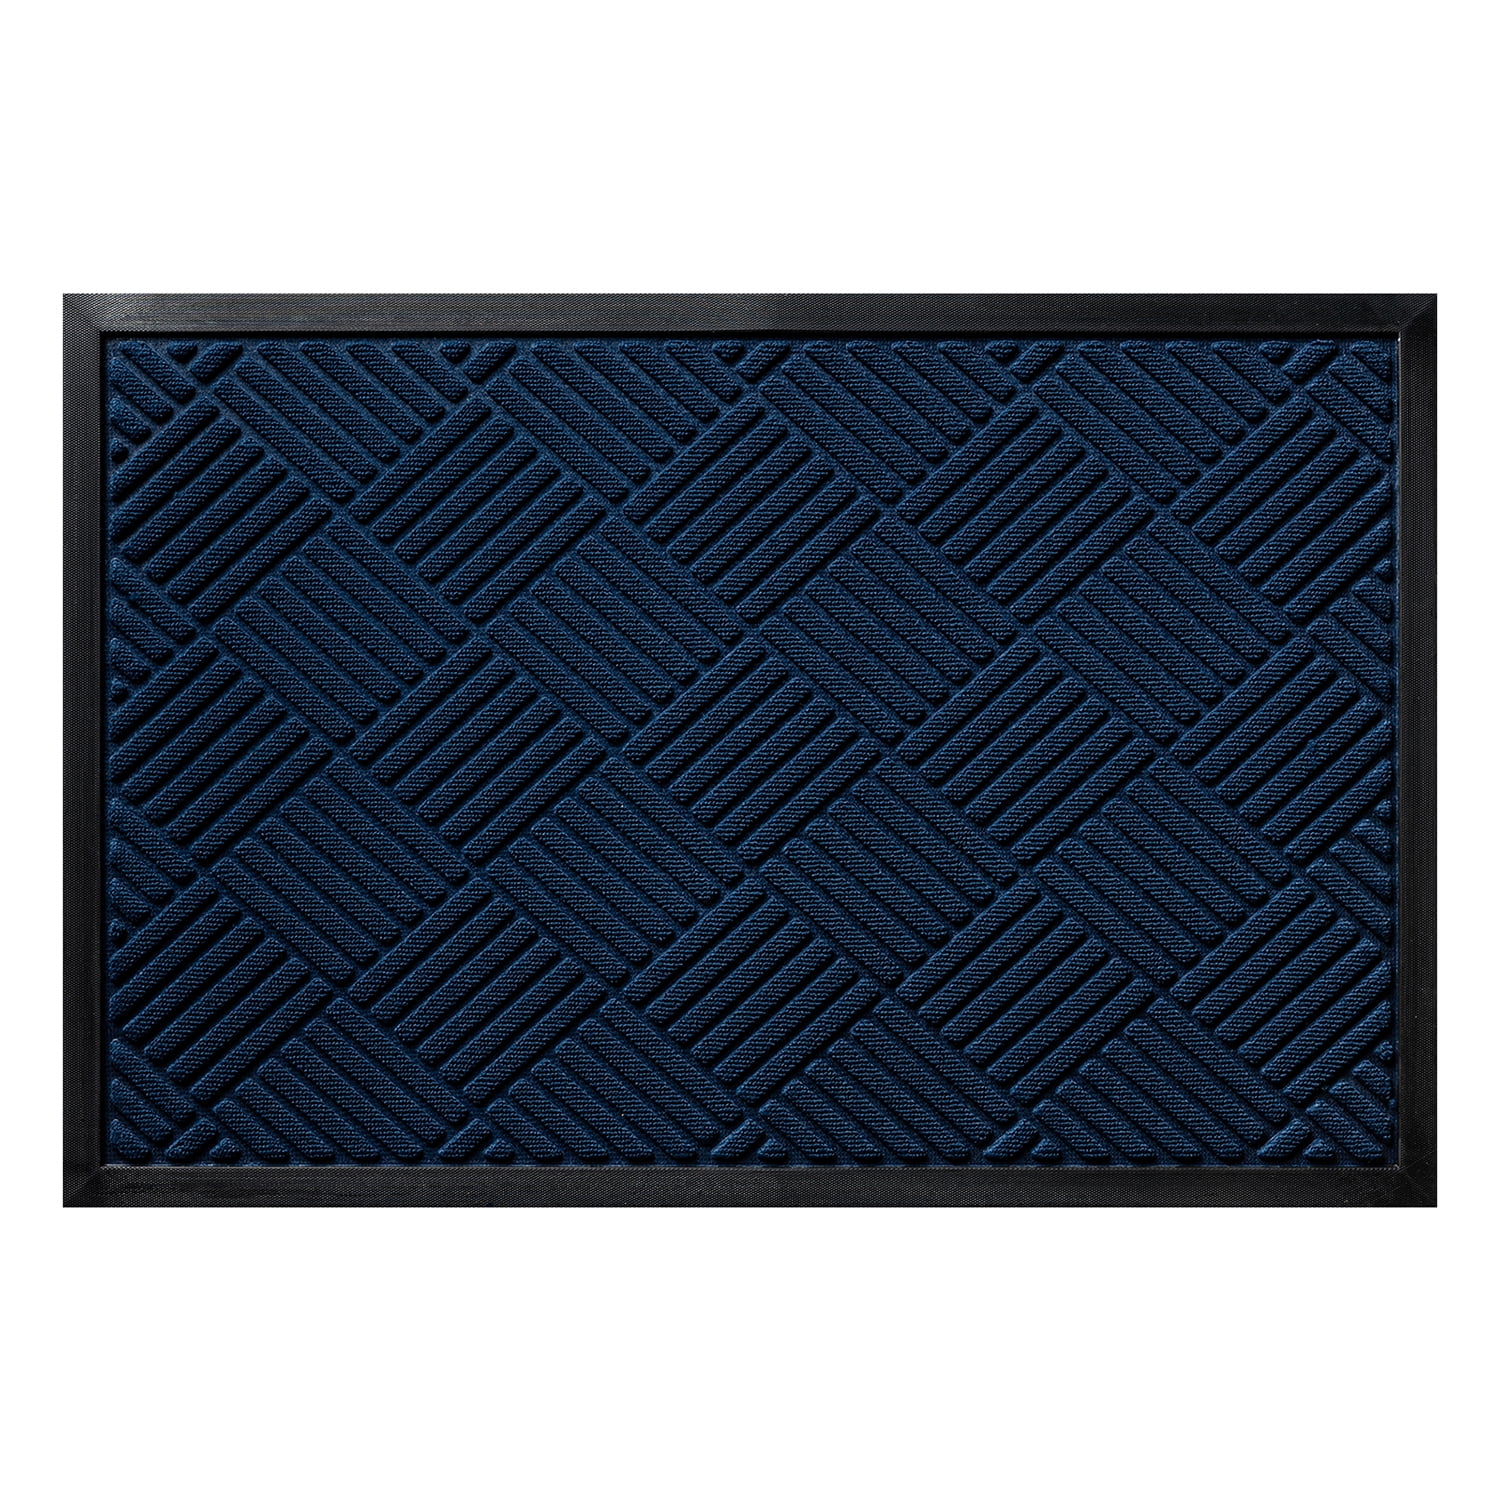 Hreasky Silicone Indoor Door Mat - Quick Dry, Strong Suction& Machine Washable Floor Mat, Low Profile for Home Entrance, Garage, Patio, 17x 30